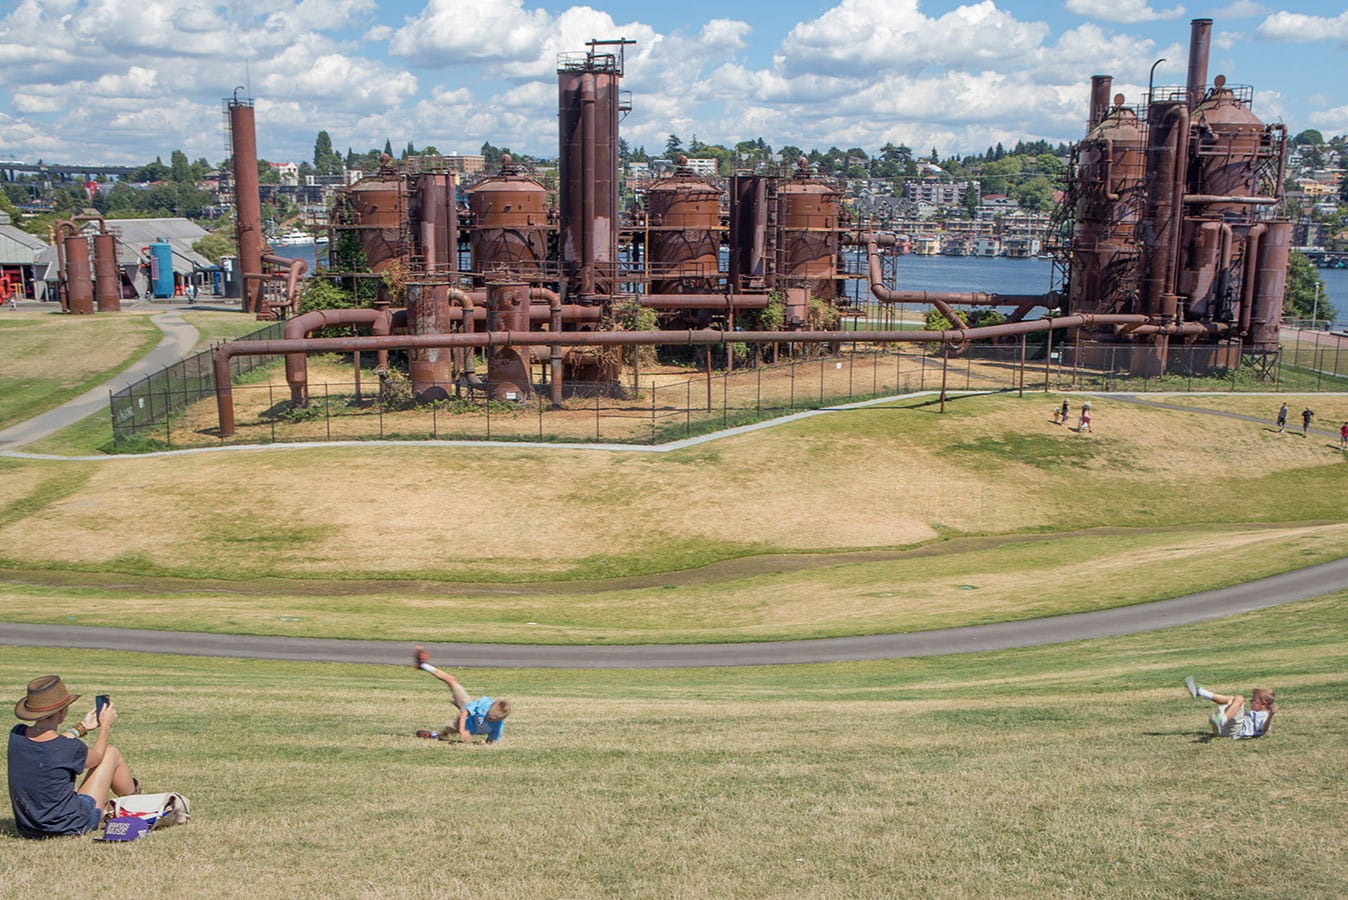 Who Was The Landscape Architect Behind The Remediated Gas Works Park